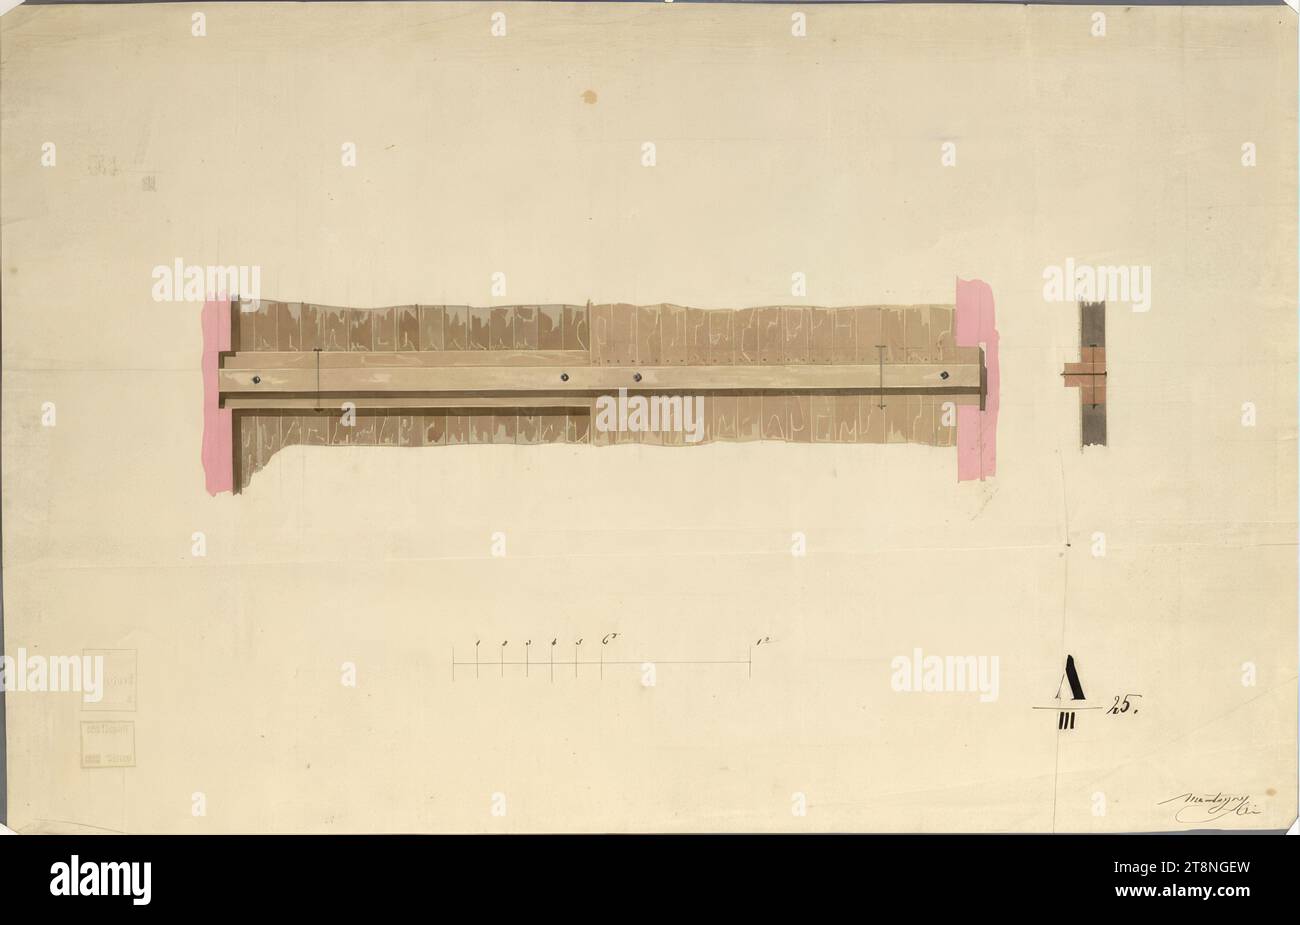 Vienna I, Hofburg, Augustinergang wing, library gallery above the Augustinergang, ceiling construction with wooden traverse, bottom view and section, around 1820, Architectural drawing, chalk (preliminary drawing); pen in black; brown and pink wash, sheet: 29.4 x 45.7 cm, 'A/ III 25.', verso: StadtNo, 551' (in pen), 'A/ III 25, 234, 212, 834 Stock Photo